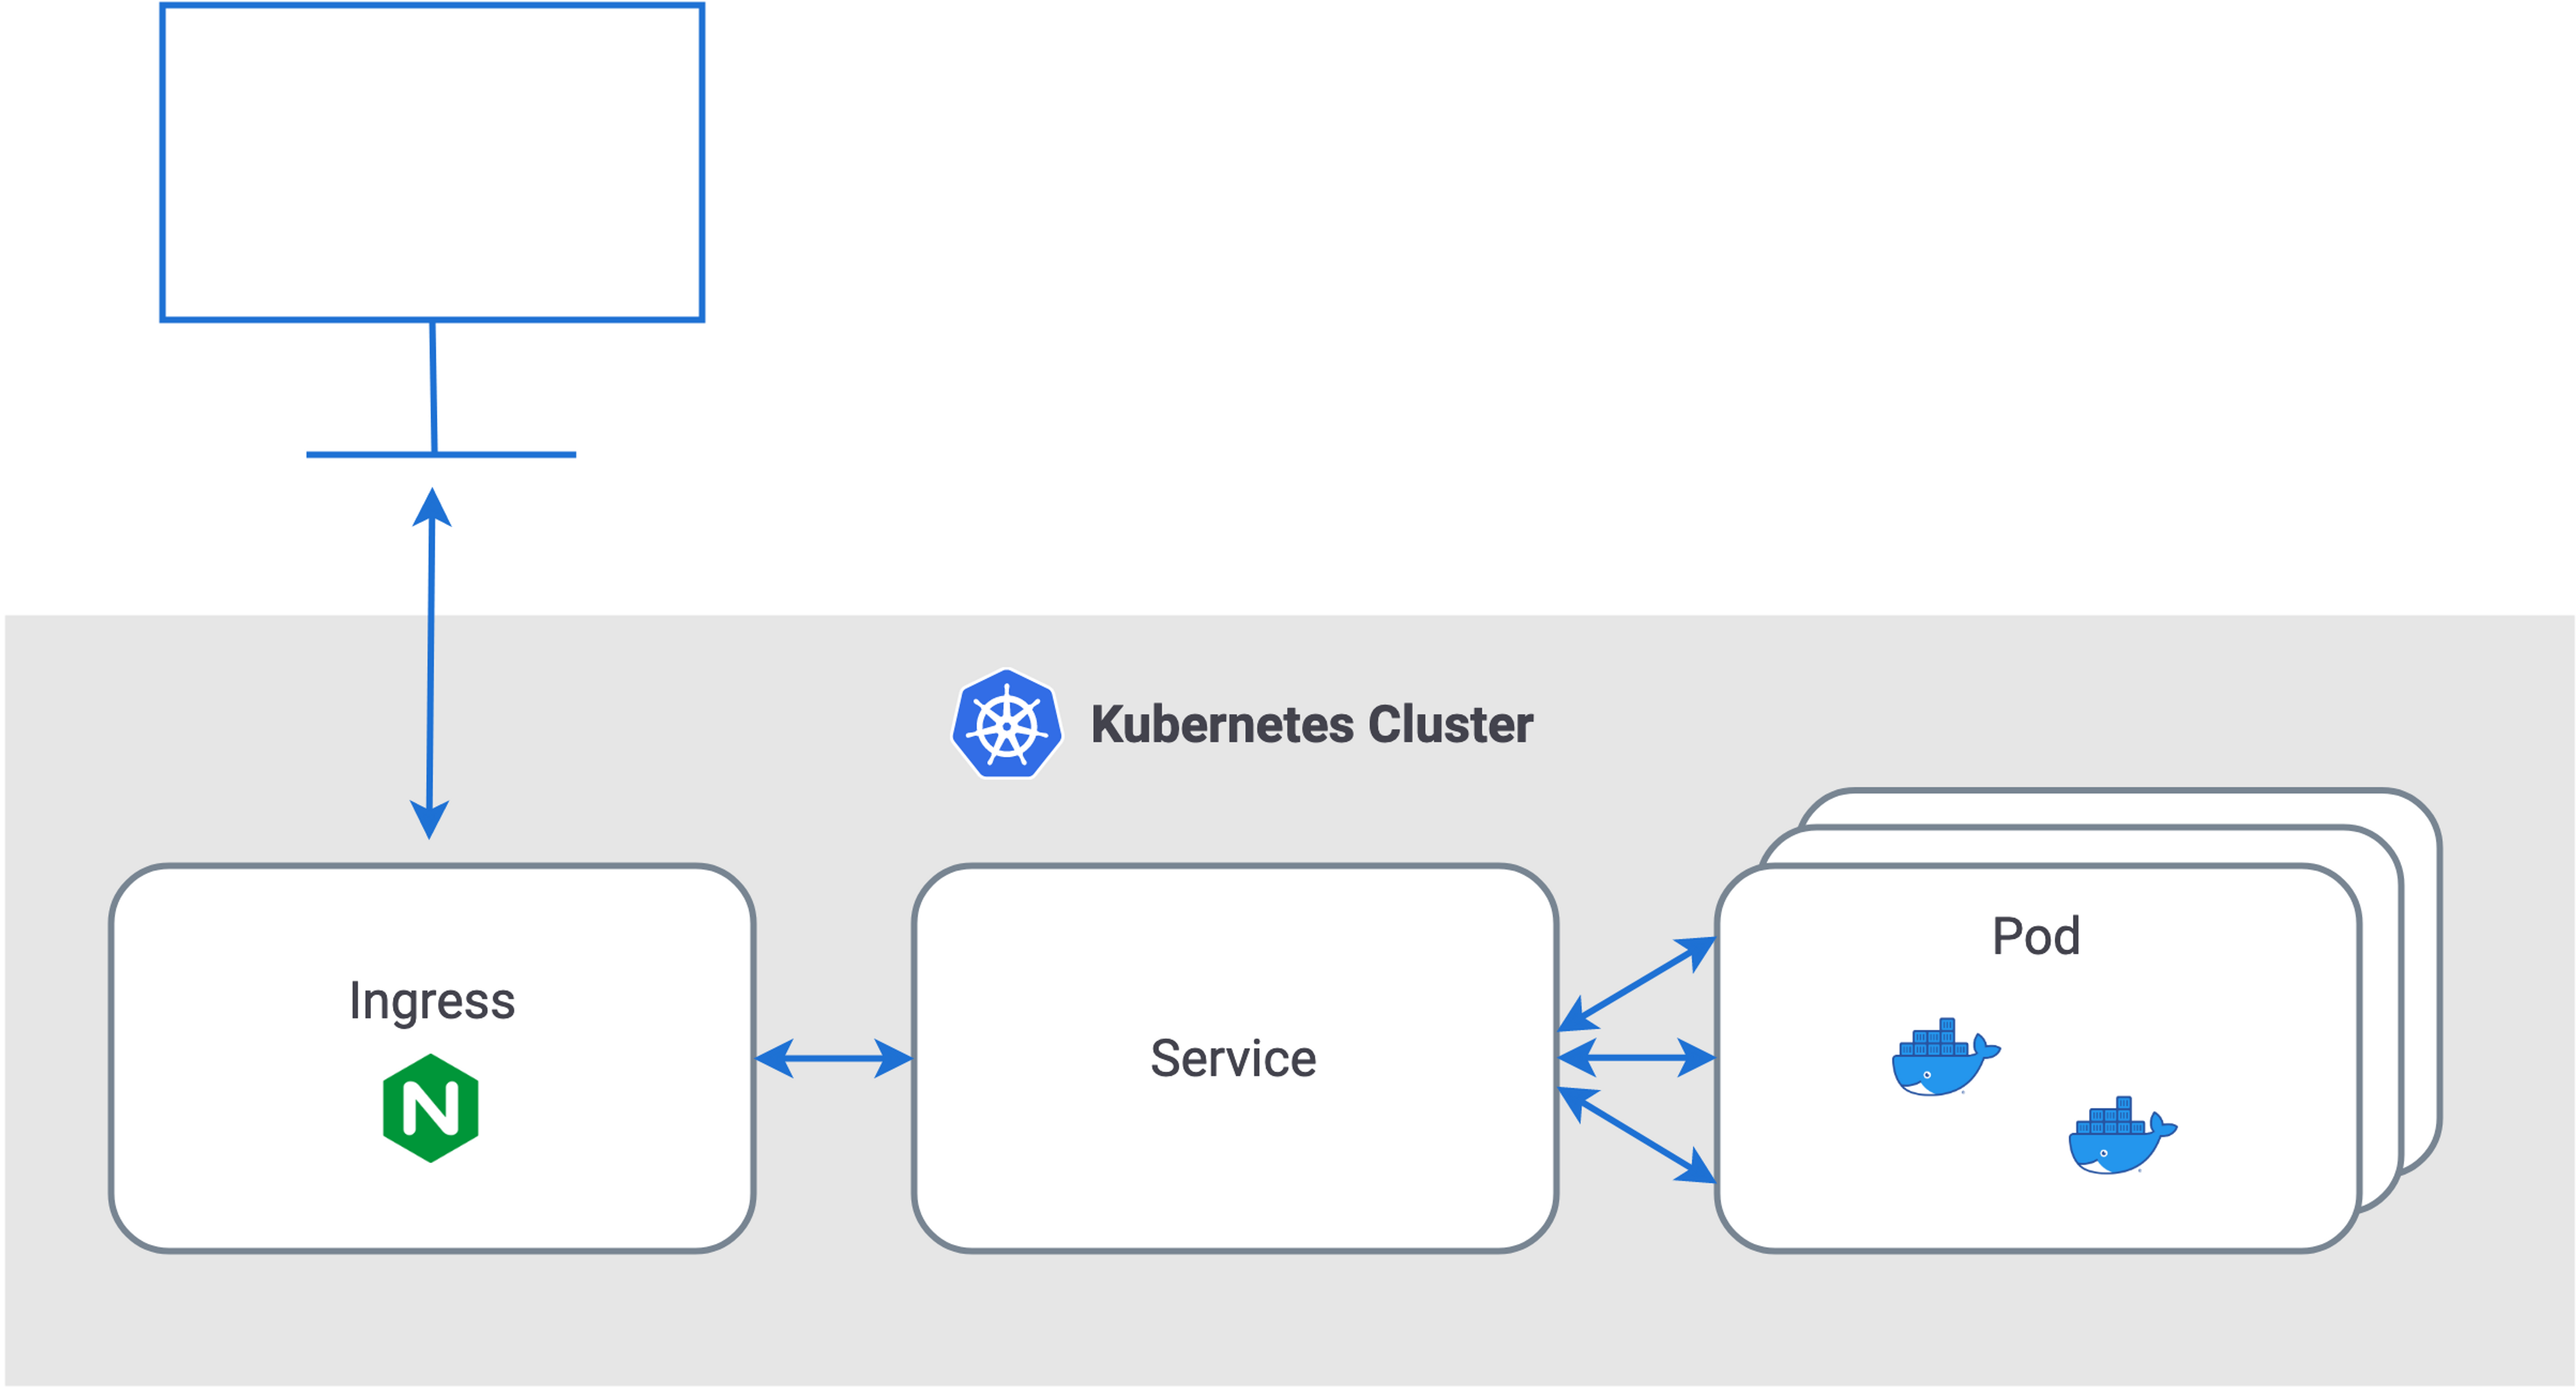 Quick Review: What Makes Up A Kubernetes Cluster?